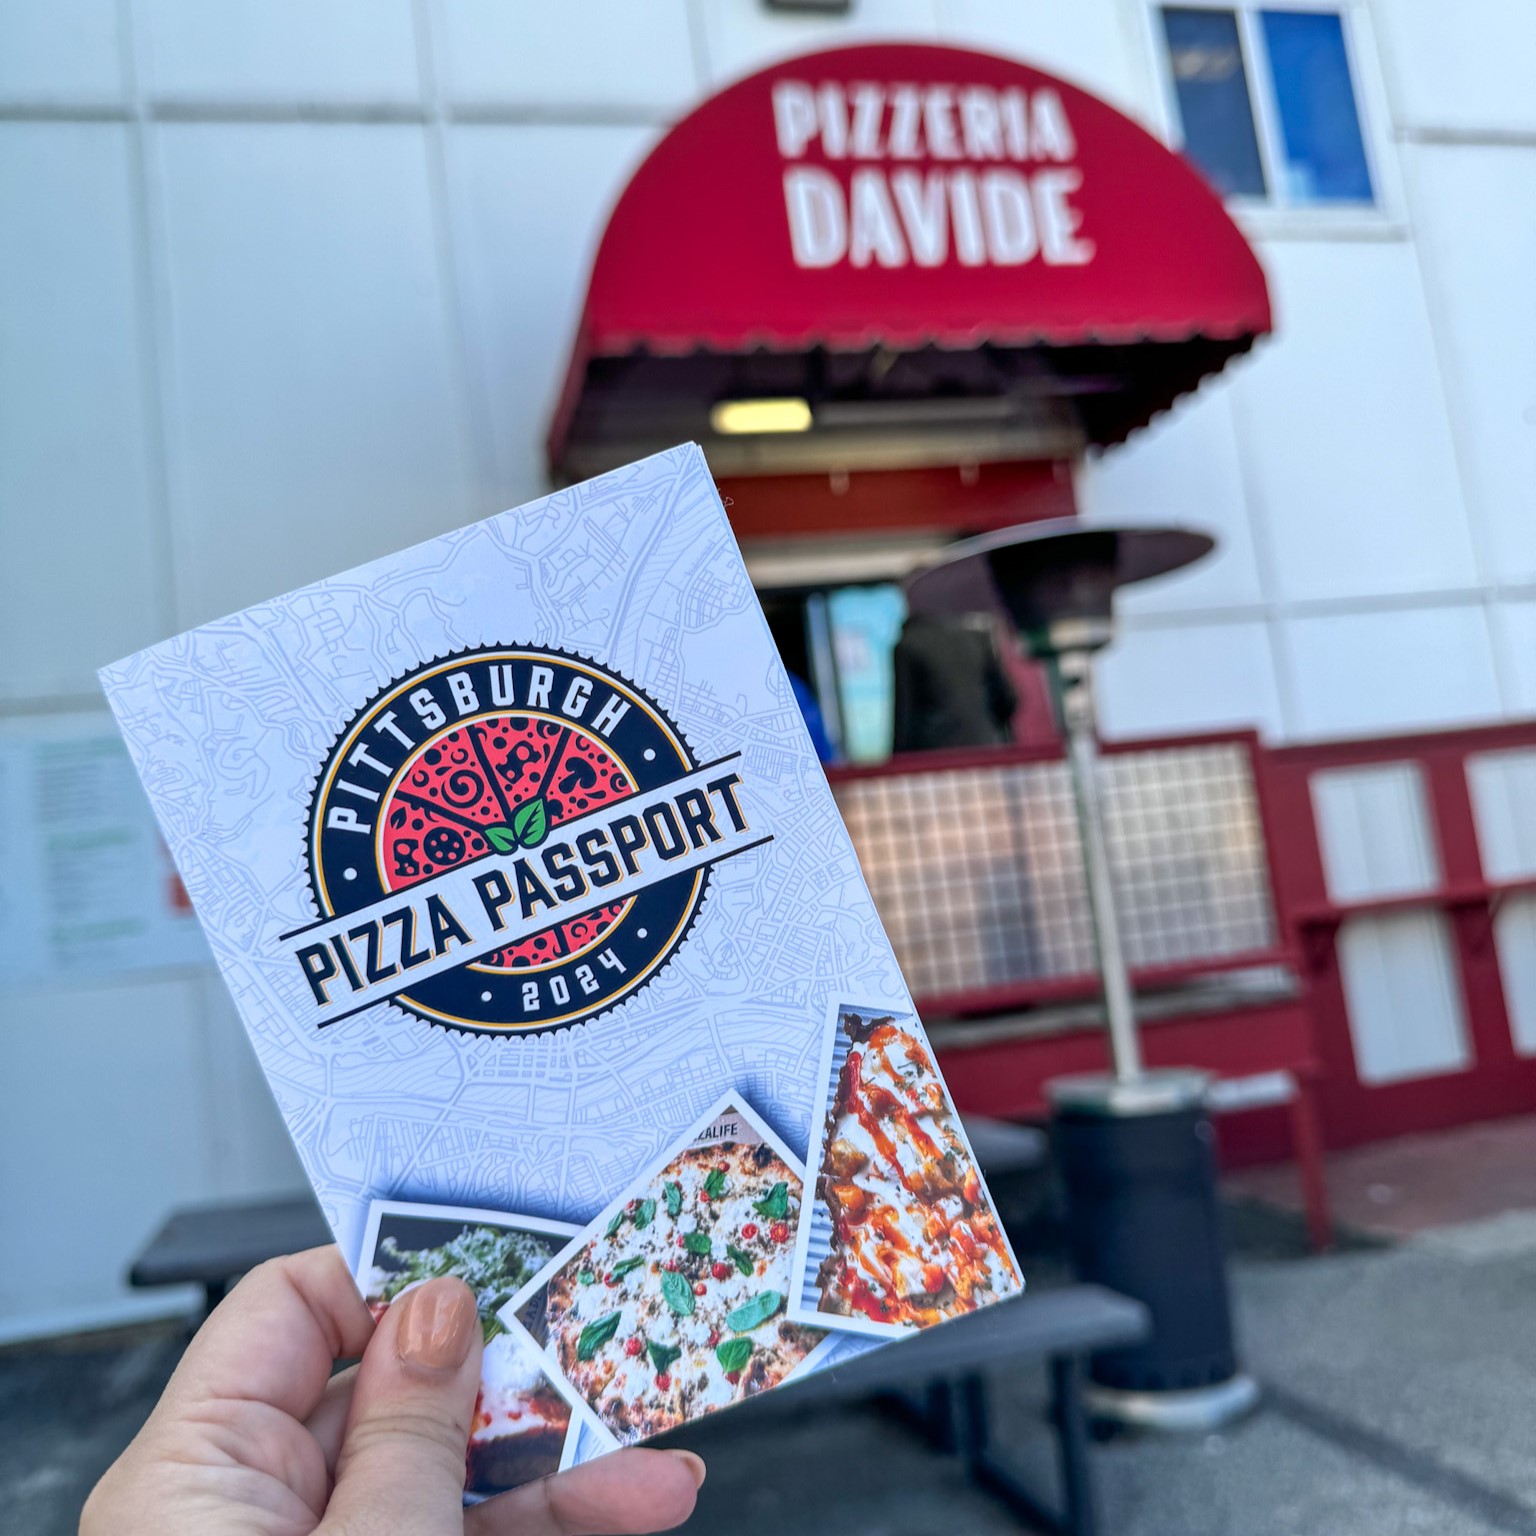 The Pittsburgh Pizza Passport book held up in front of Pizzeria Davide, one of the stops on the self-guided tour.